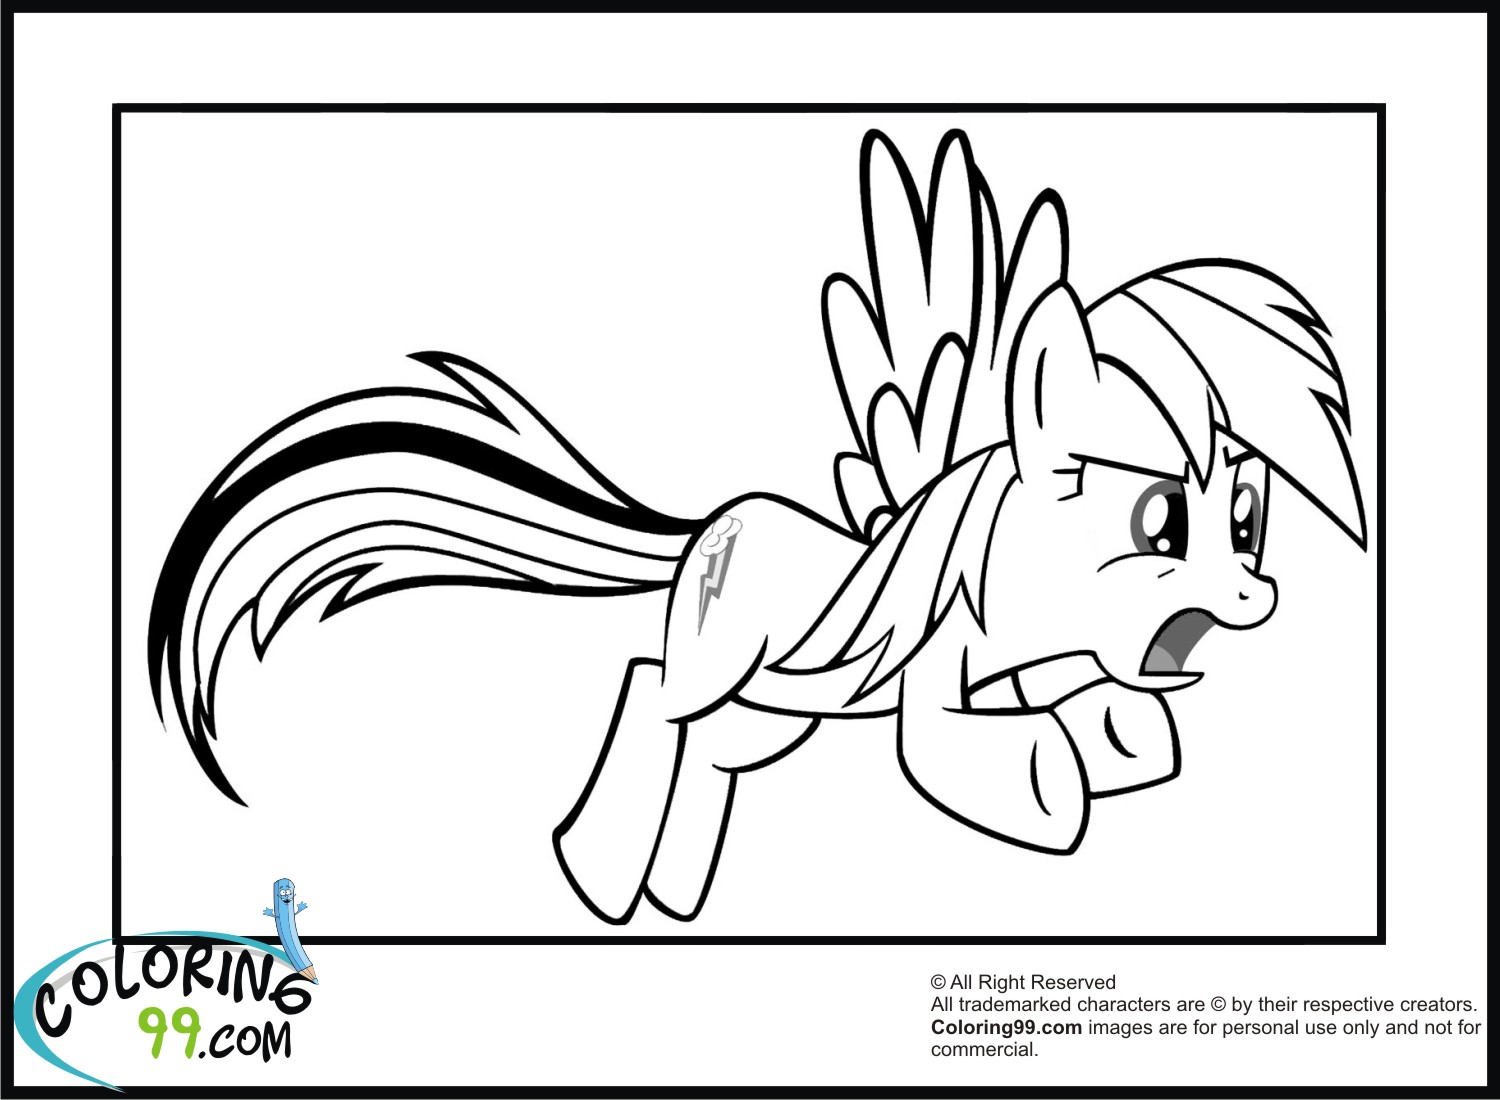  Rainbow  Dash  Coloring  Pages  Team colors